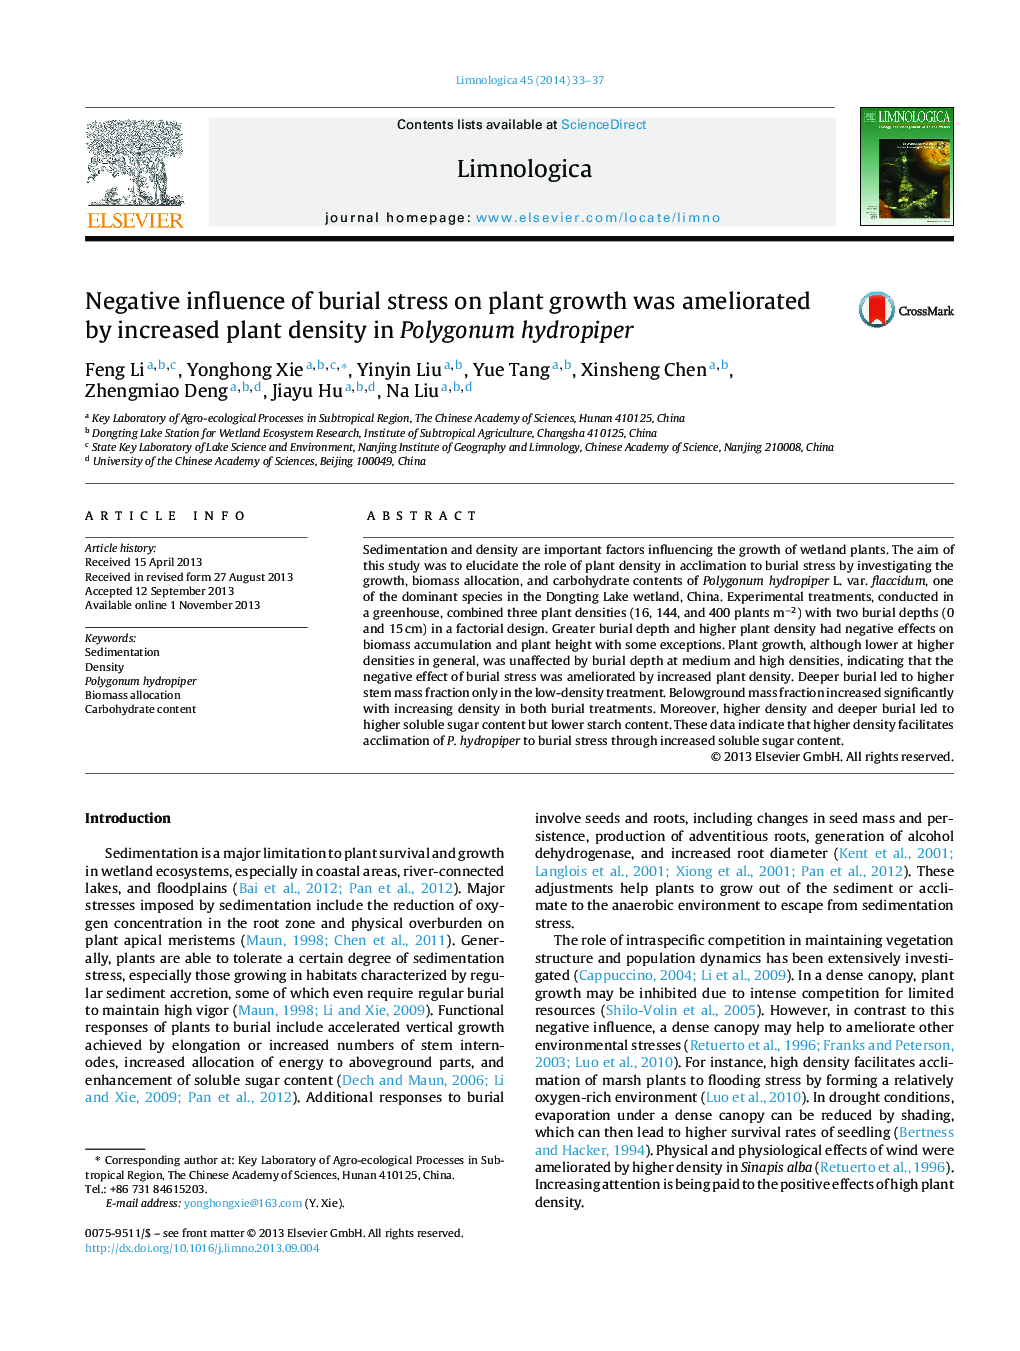 Negative influence of burial stress on plant growth was ameliorated by increased plant density in Polygonum hydropiper